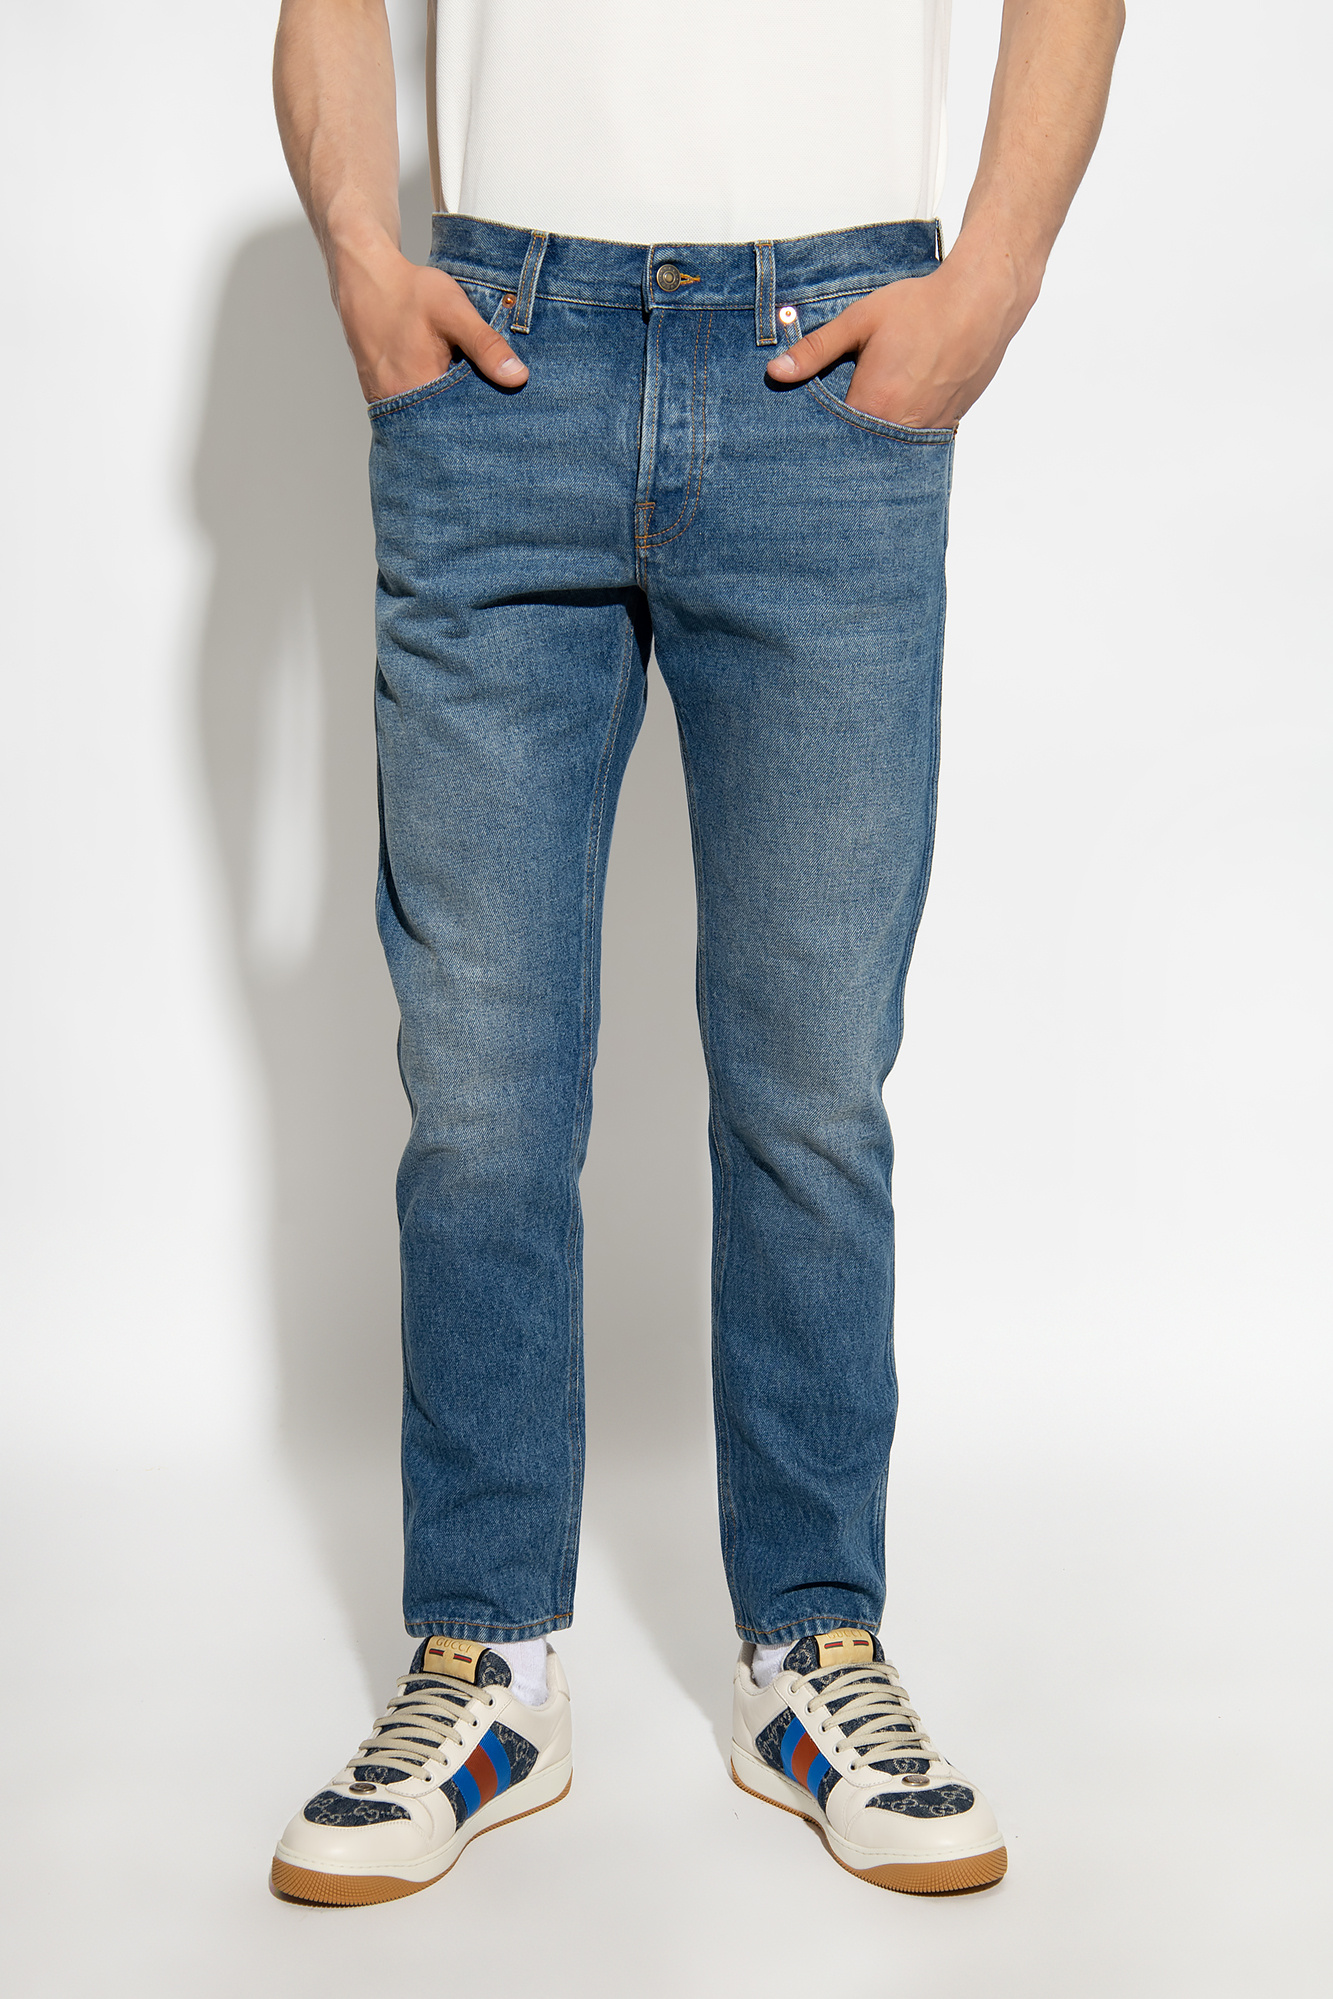 Gucci Jeans with logo | Men's Clothing | Vitkac